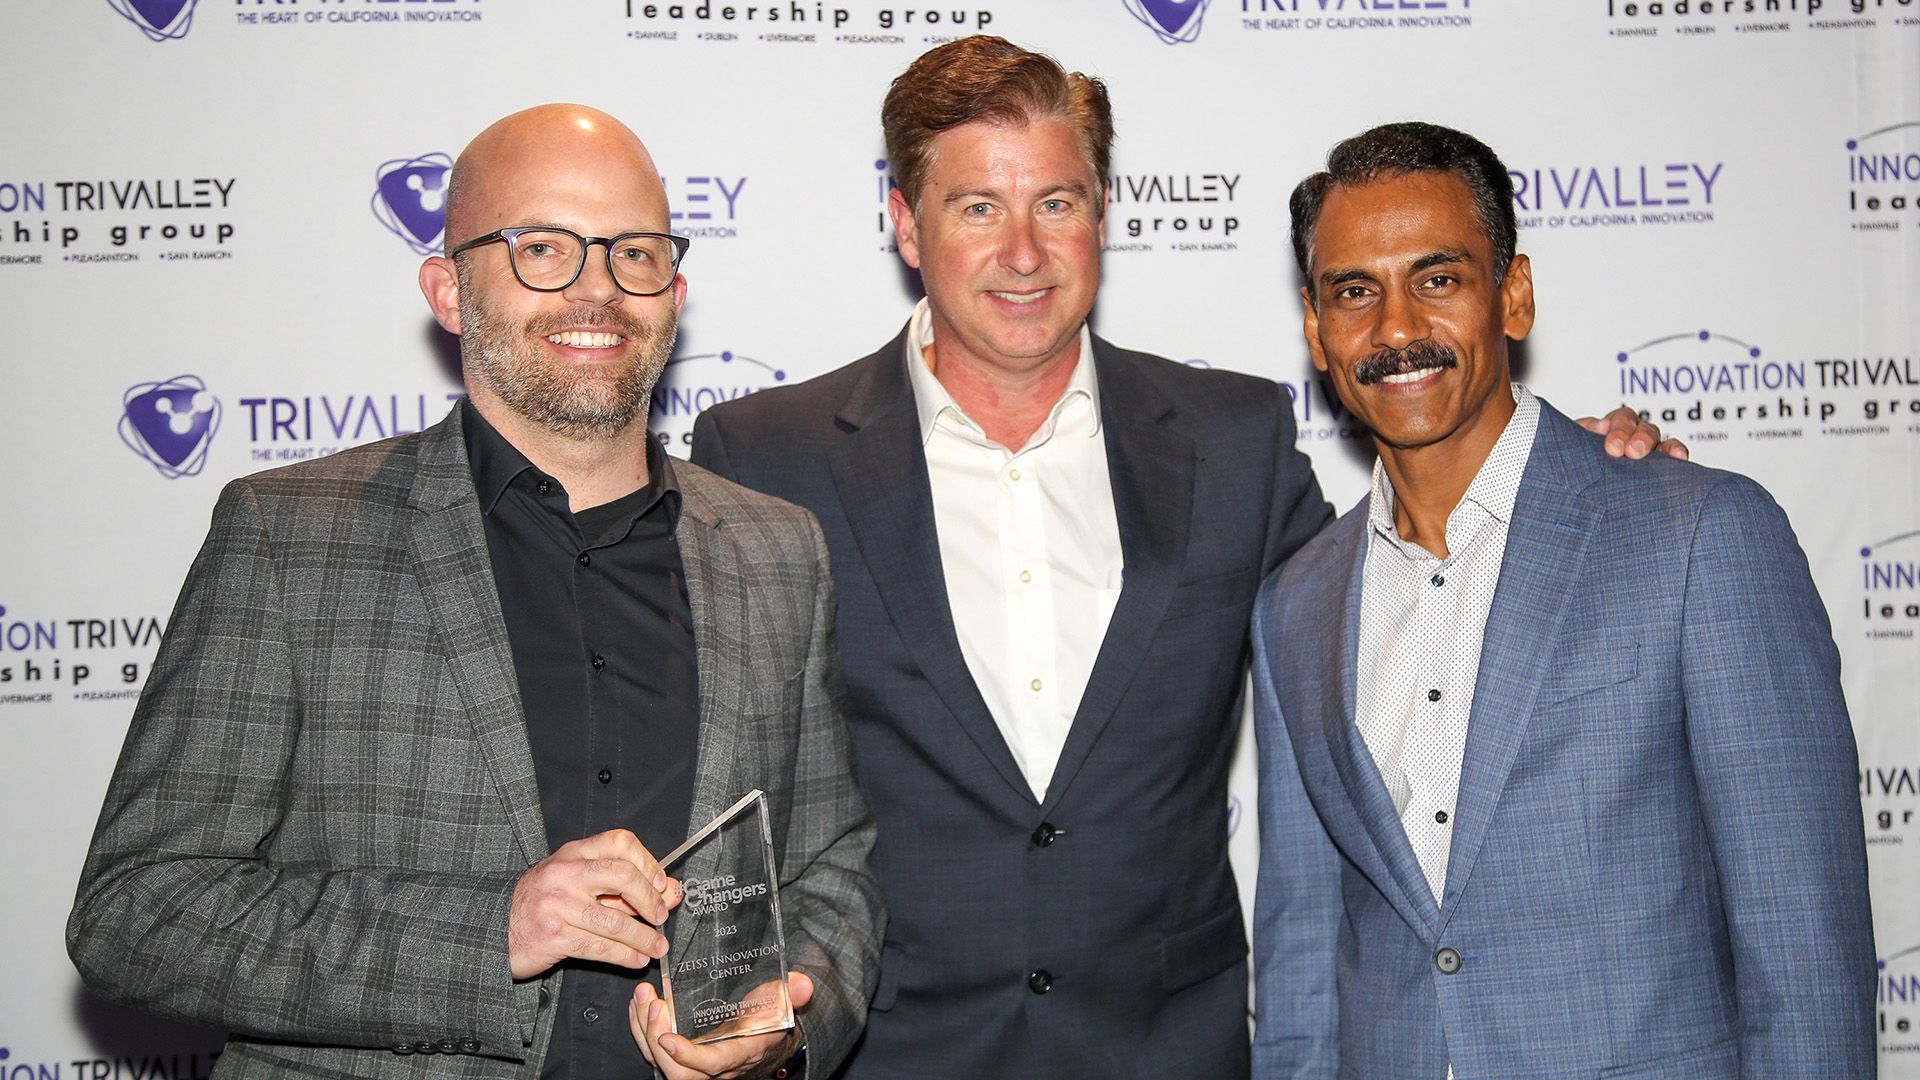 Florian Mezger, Head of Shared Services and Head of HR at ZEISS, David Haubert, Alameda County Supervisor, and Jay Vijayan, CEO and founder of Tekion, a 2022 #GameChanger - from left to right.